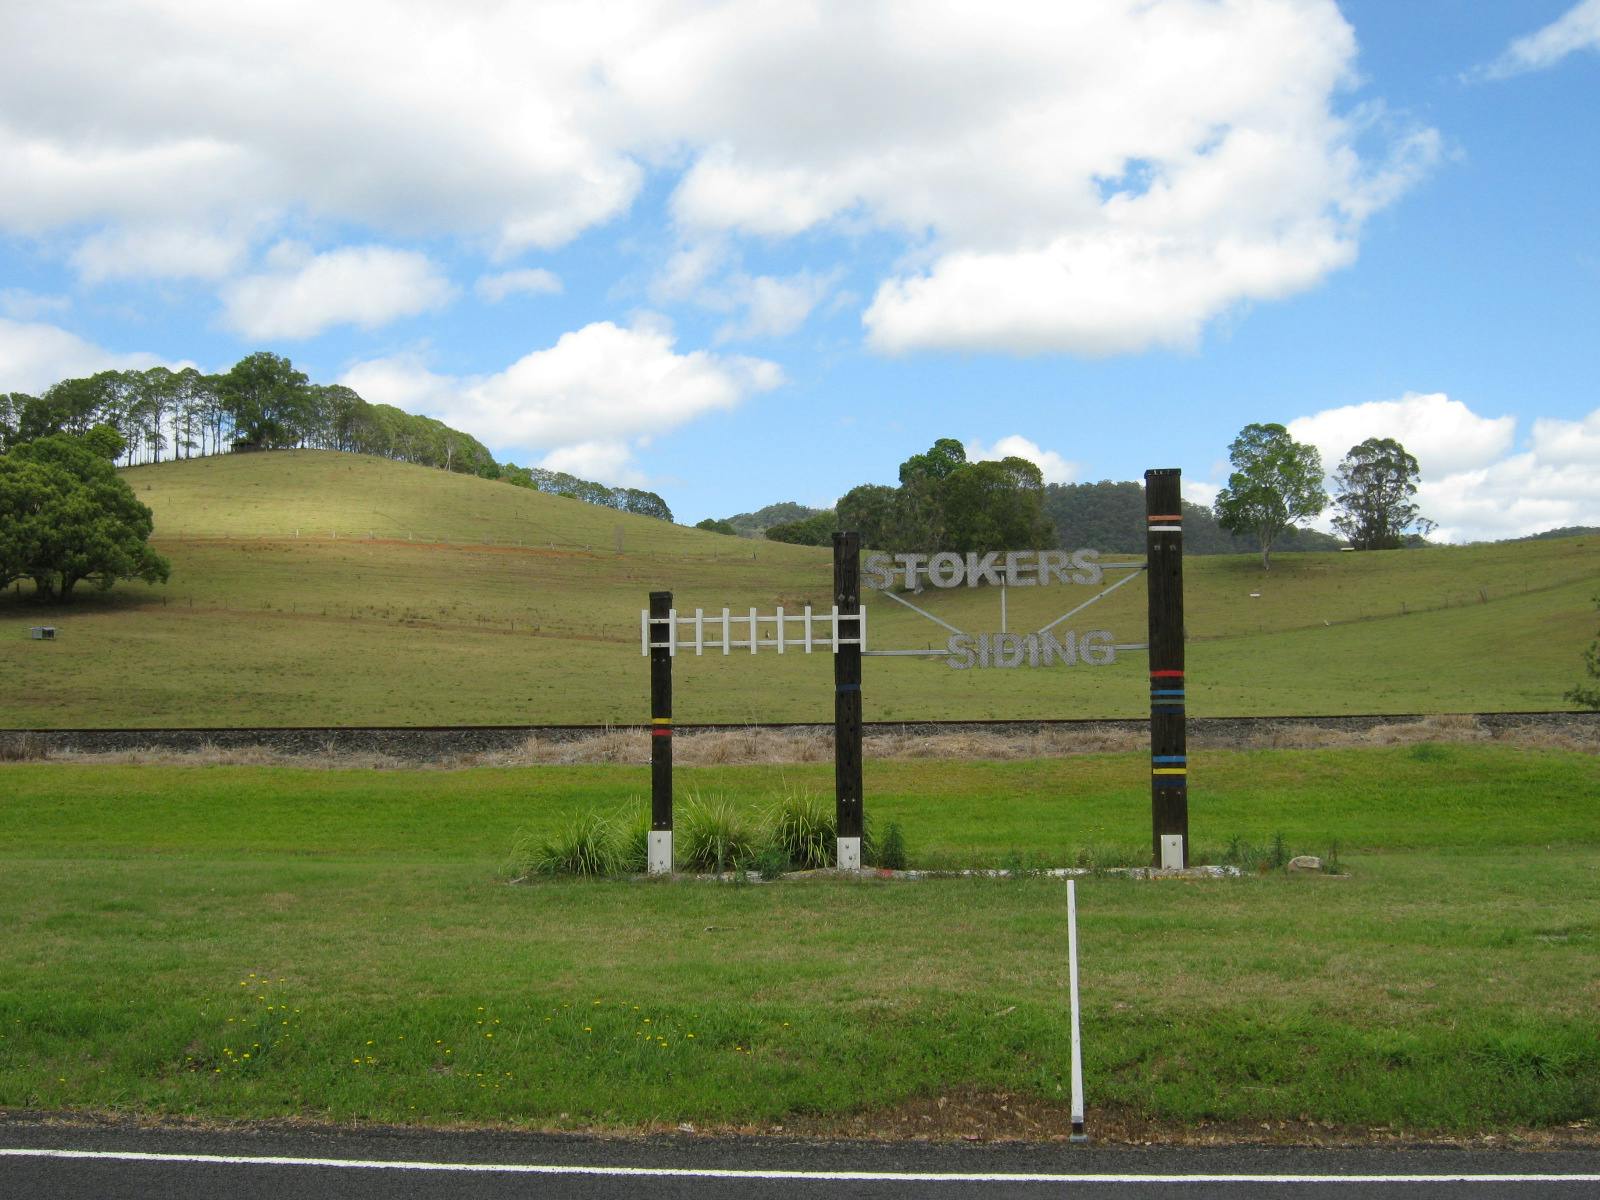 An artistic entrance statement at Stokers Siding.